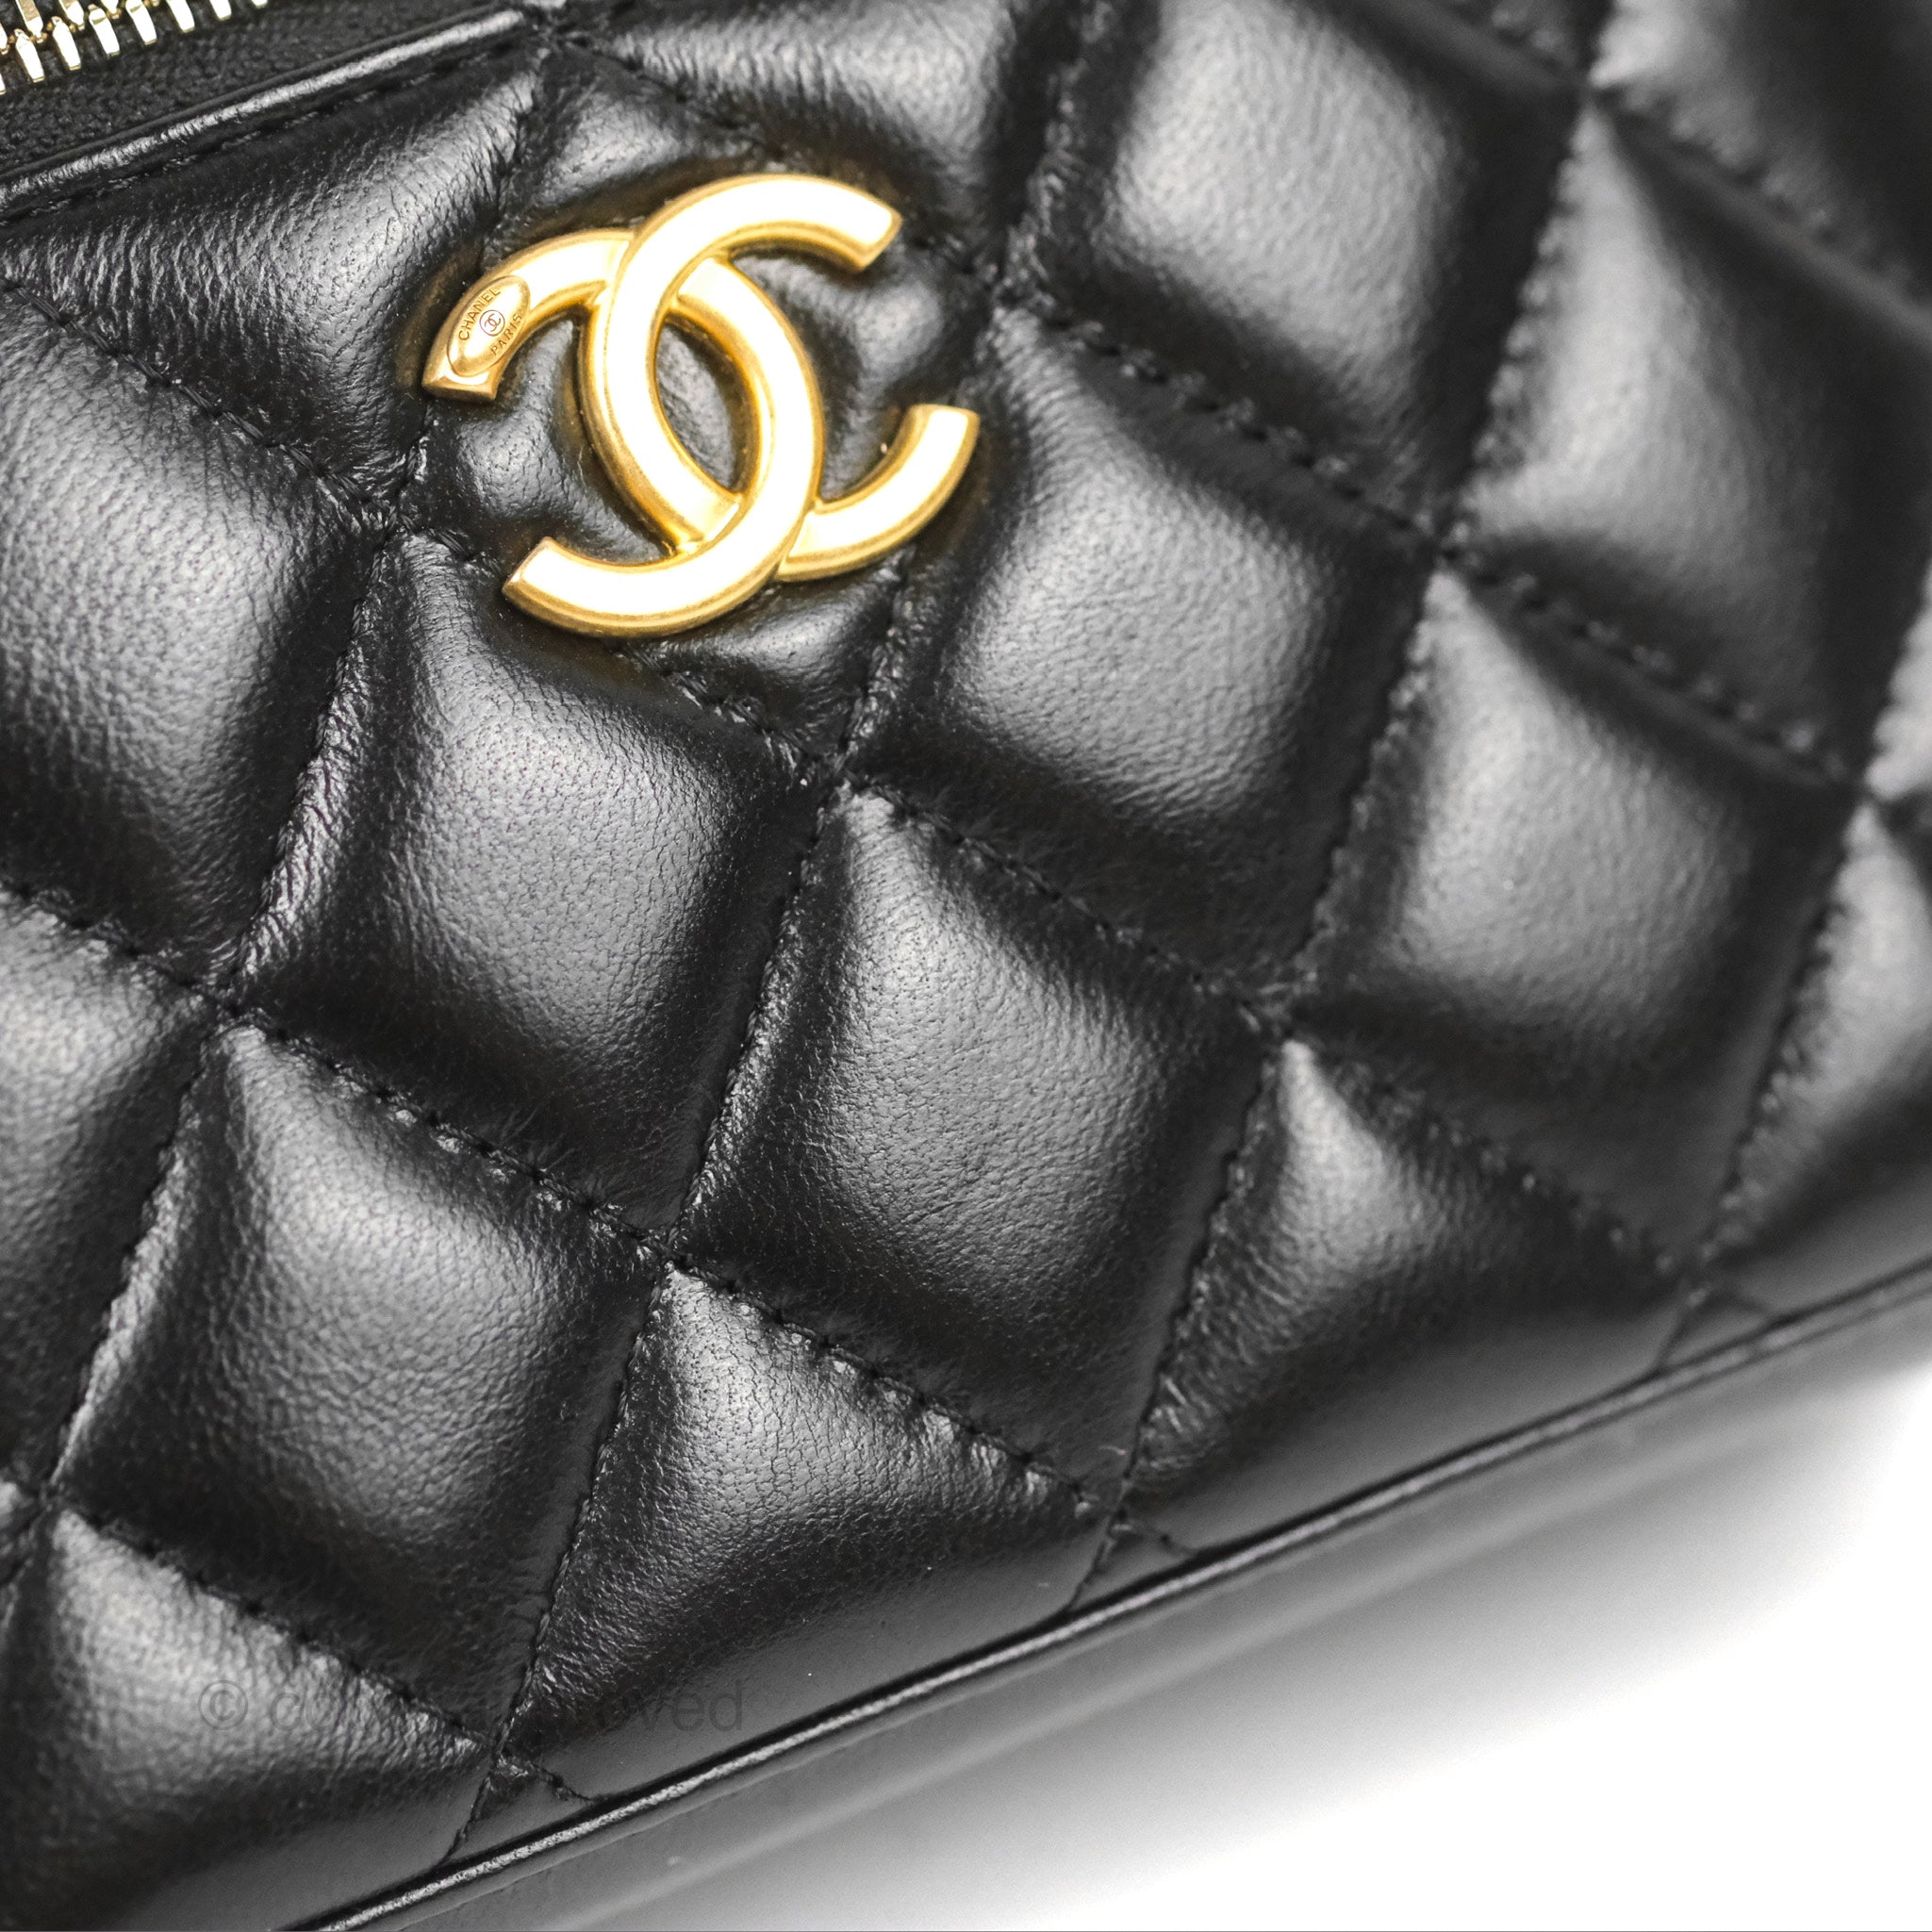 Chanel Pick Me Up Vanity Case Black Lambskin Aged Gold Hardware 22S – Coco  Approved Studio